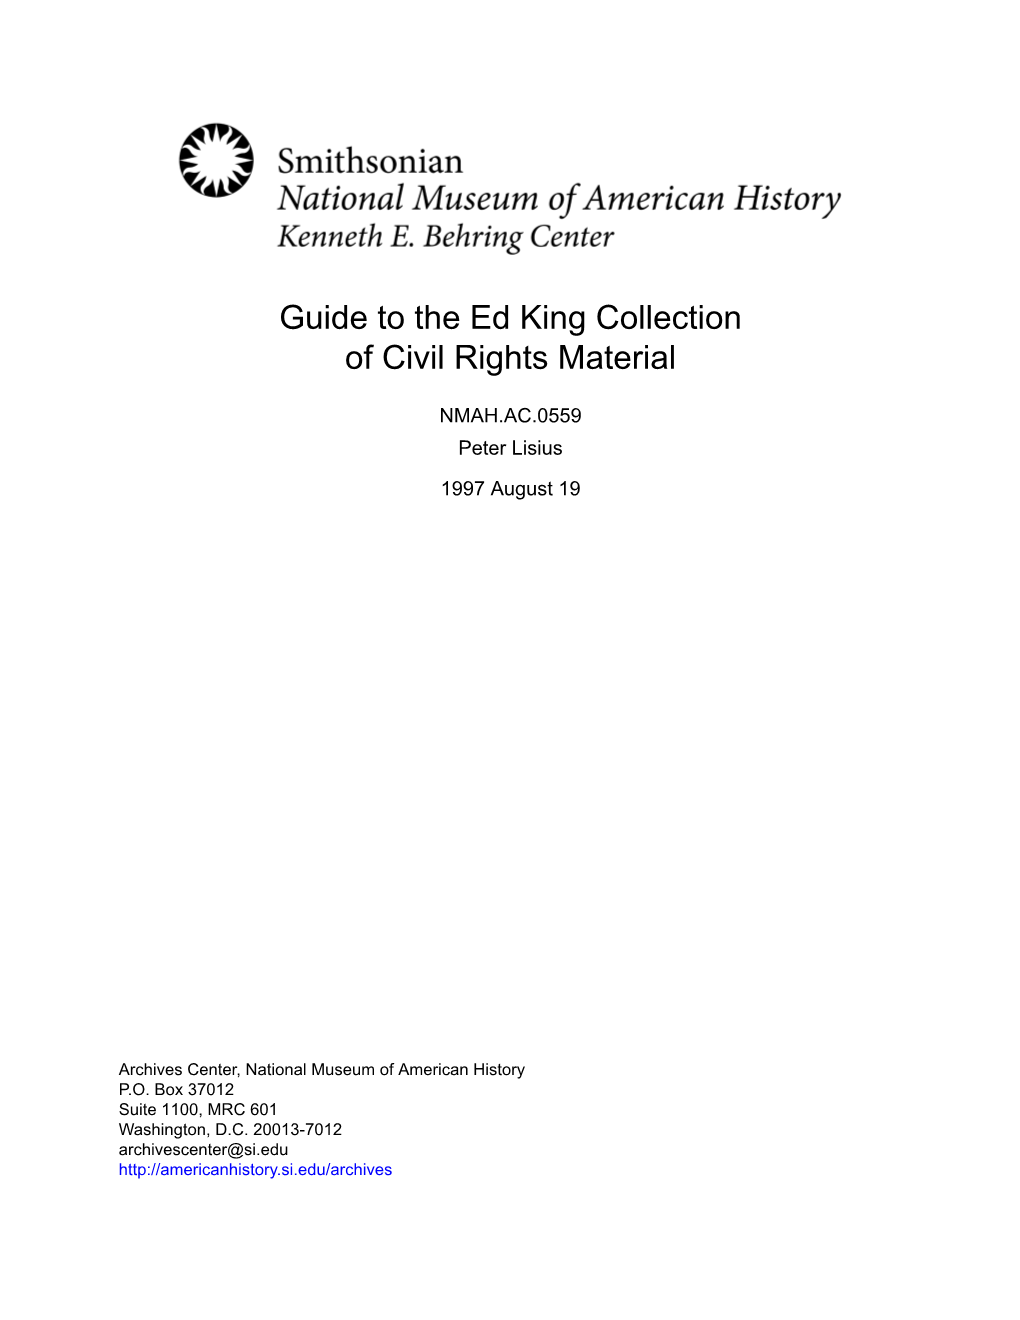 Guide to the Ed King Collection of Civil Rights Material